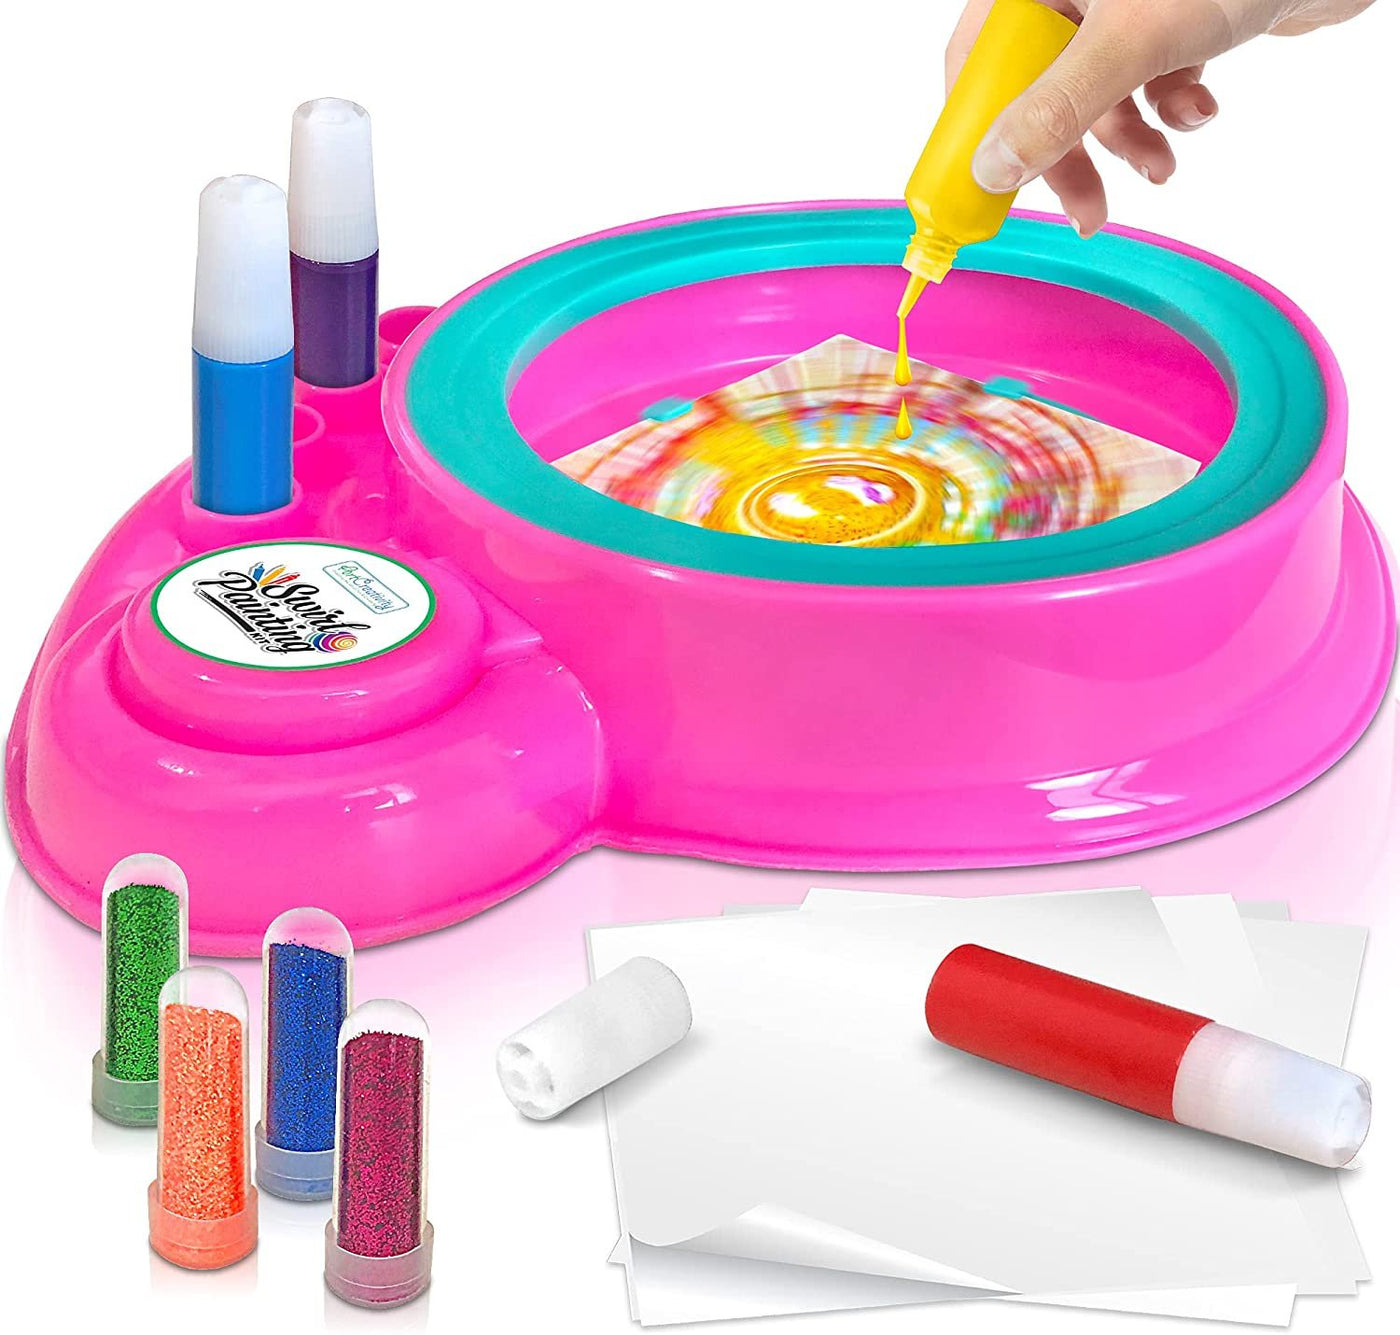 ArtCreativity Swirl Painting Kit for Kids, Friction Powered Spin